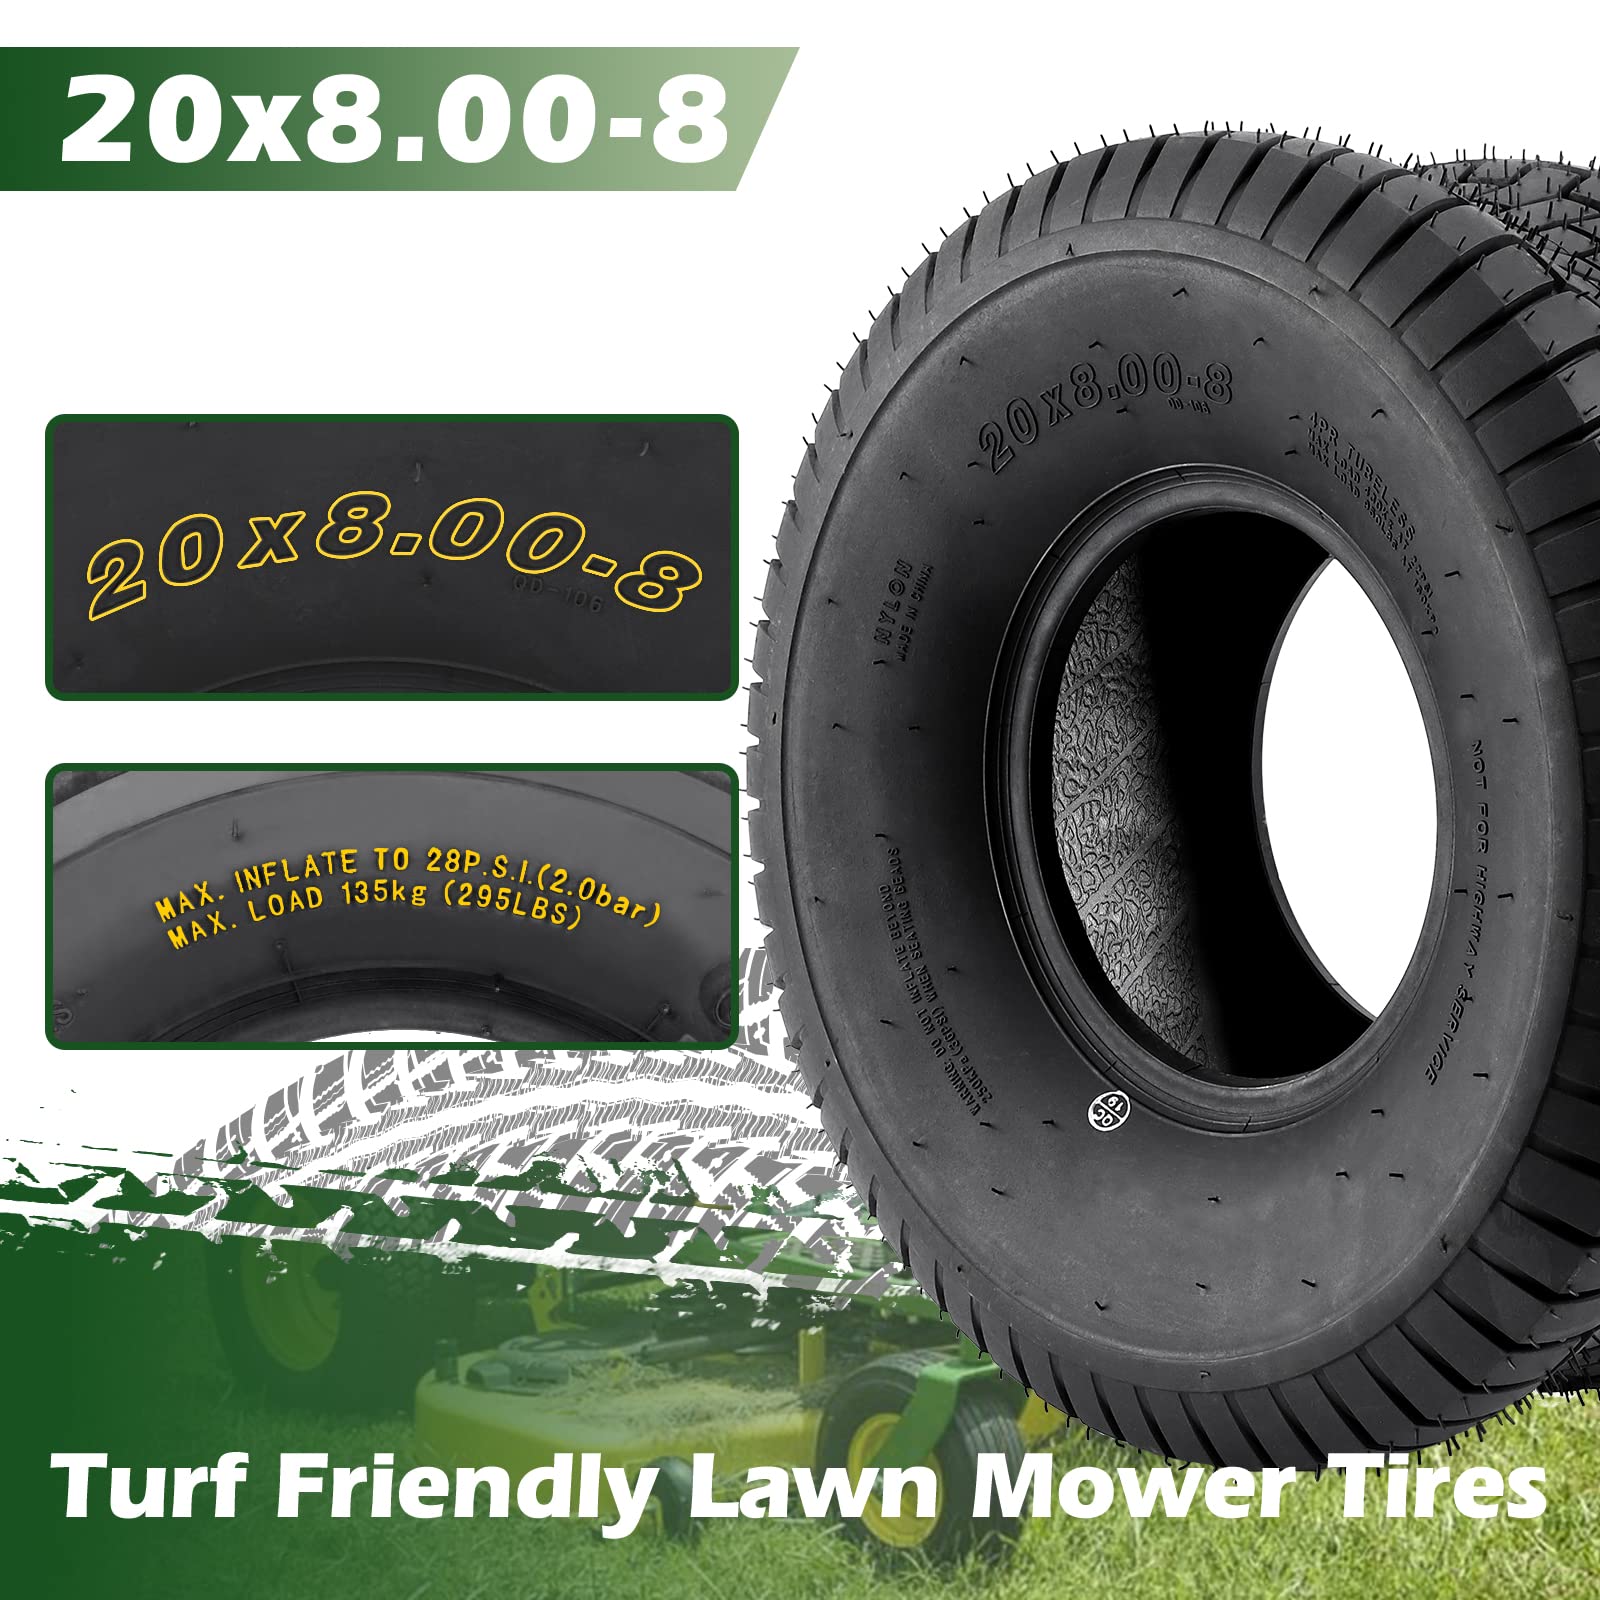 20x8.00-8 Mower Tire 2Pcs for Garden Tractors & Riding Mowers